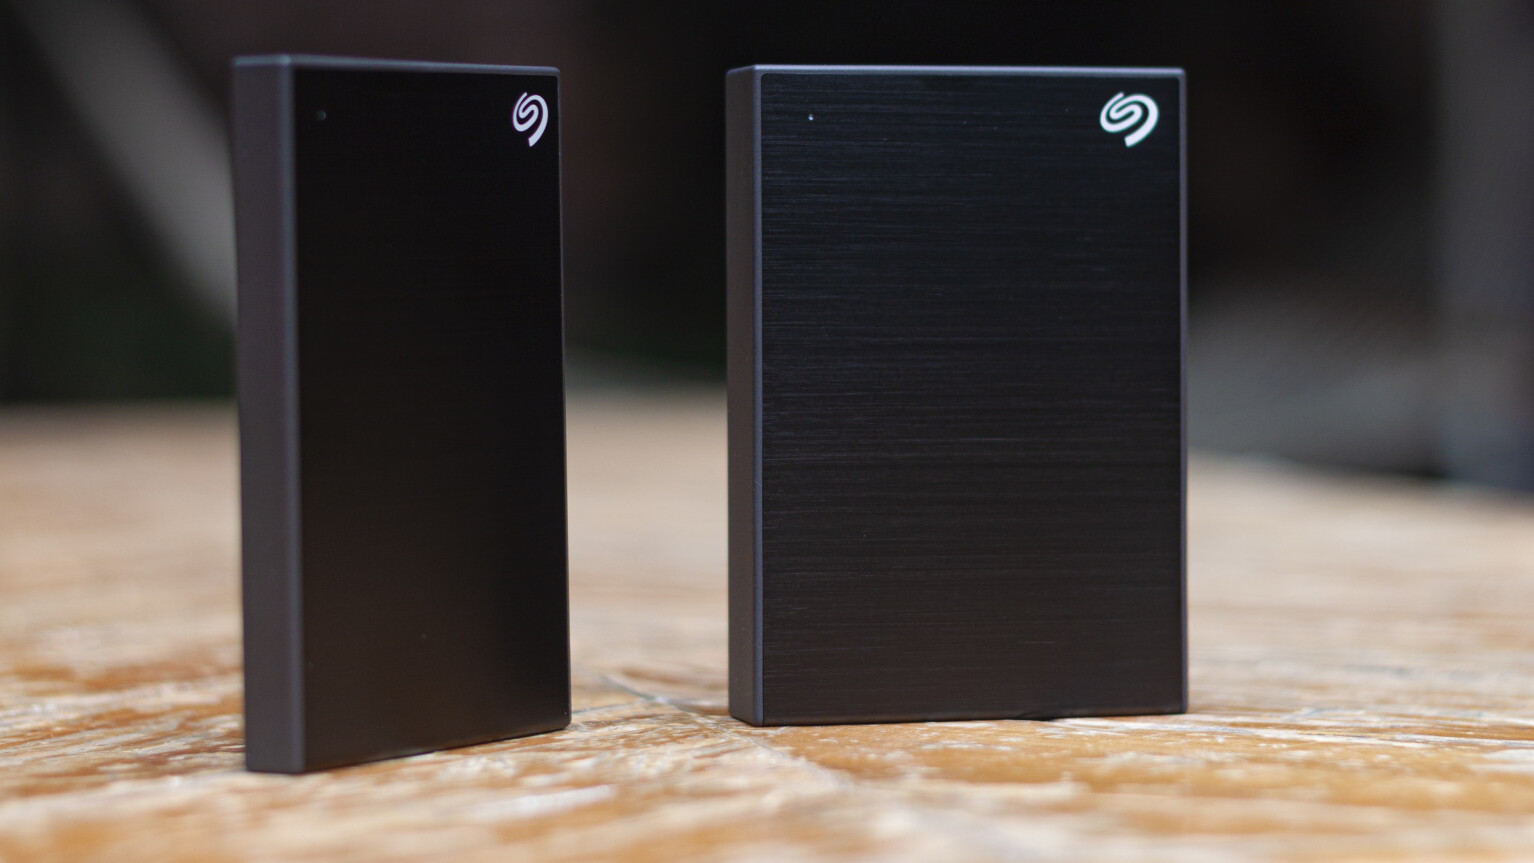 Seagate’s compact, budget hard drives are perfect for backing up data on the go